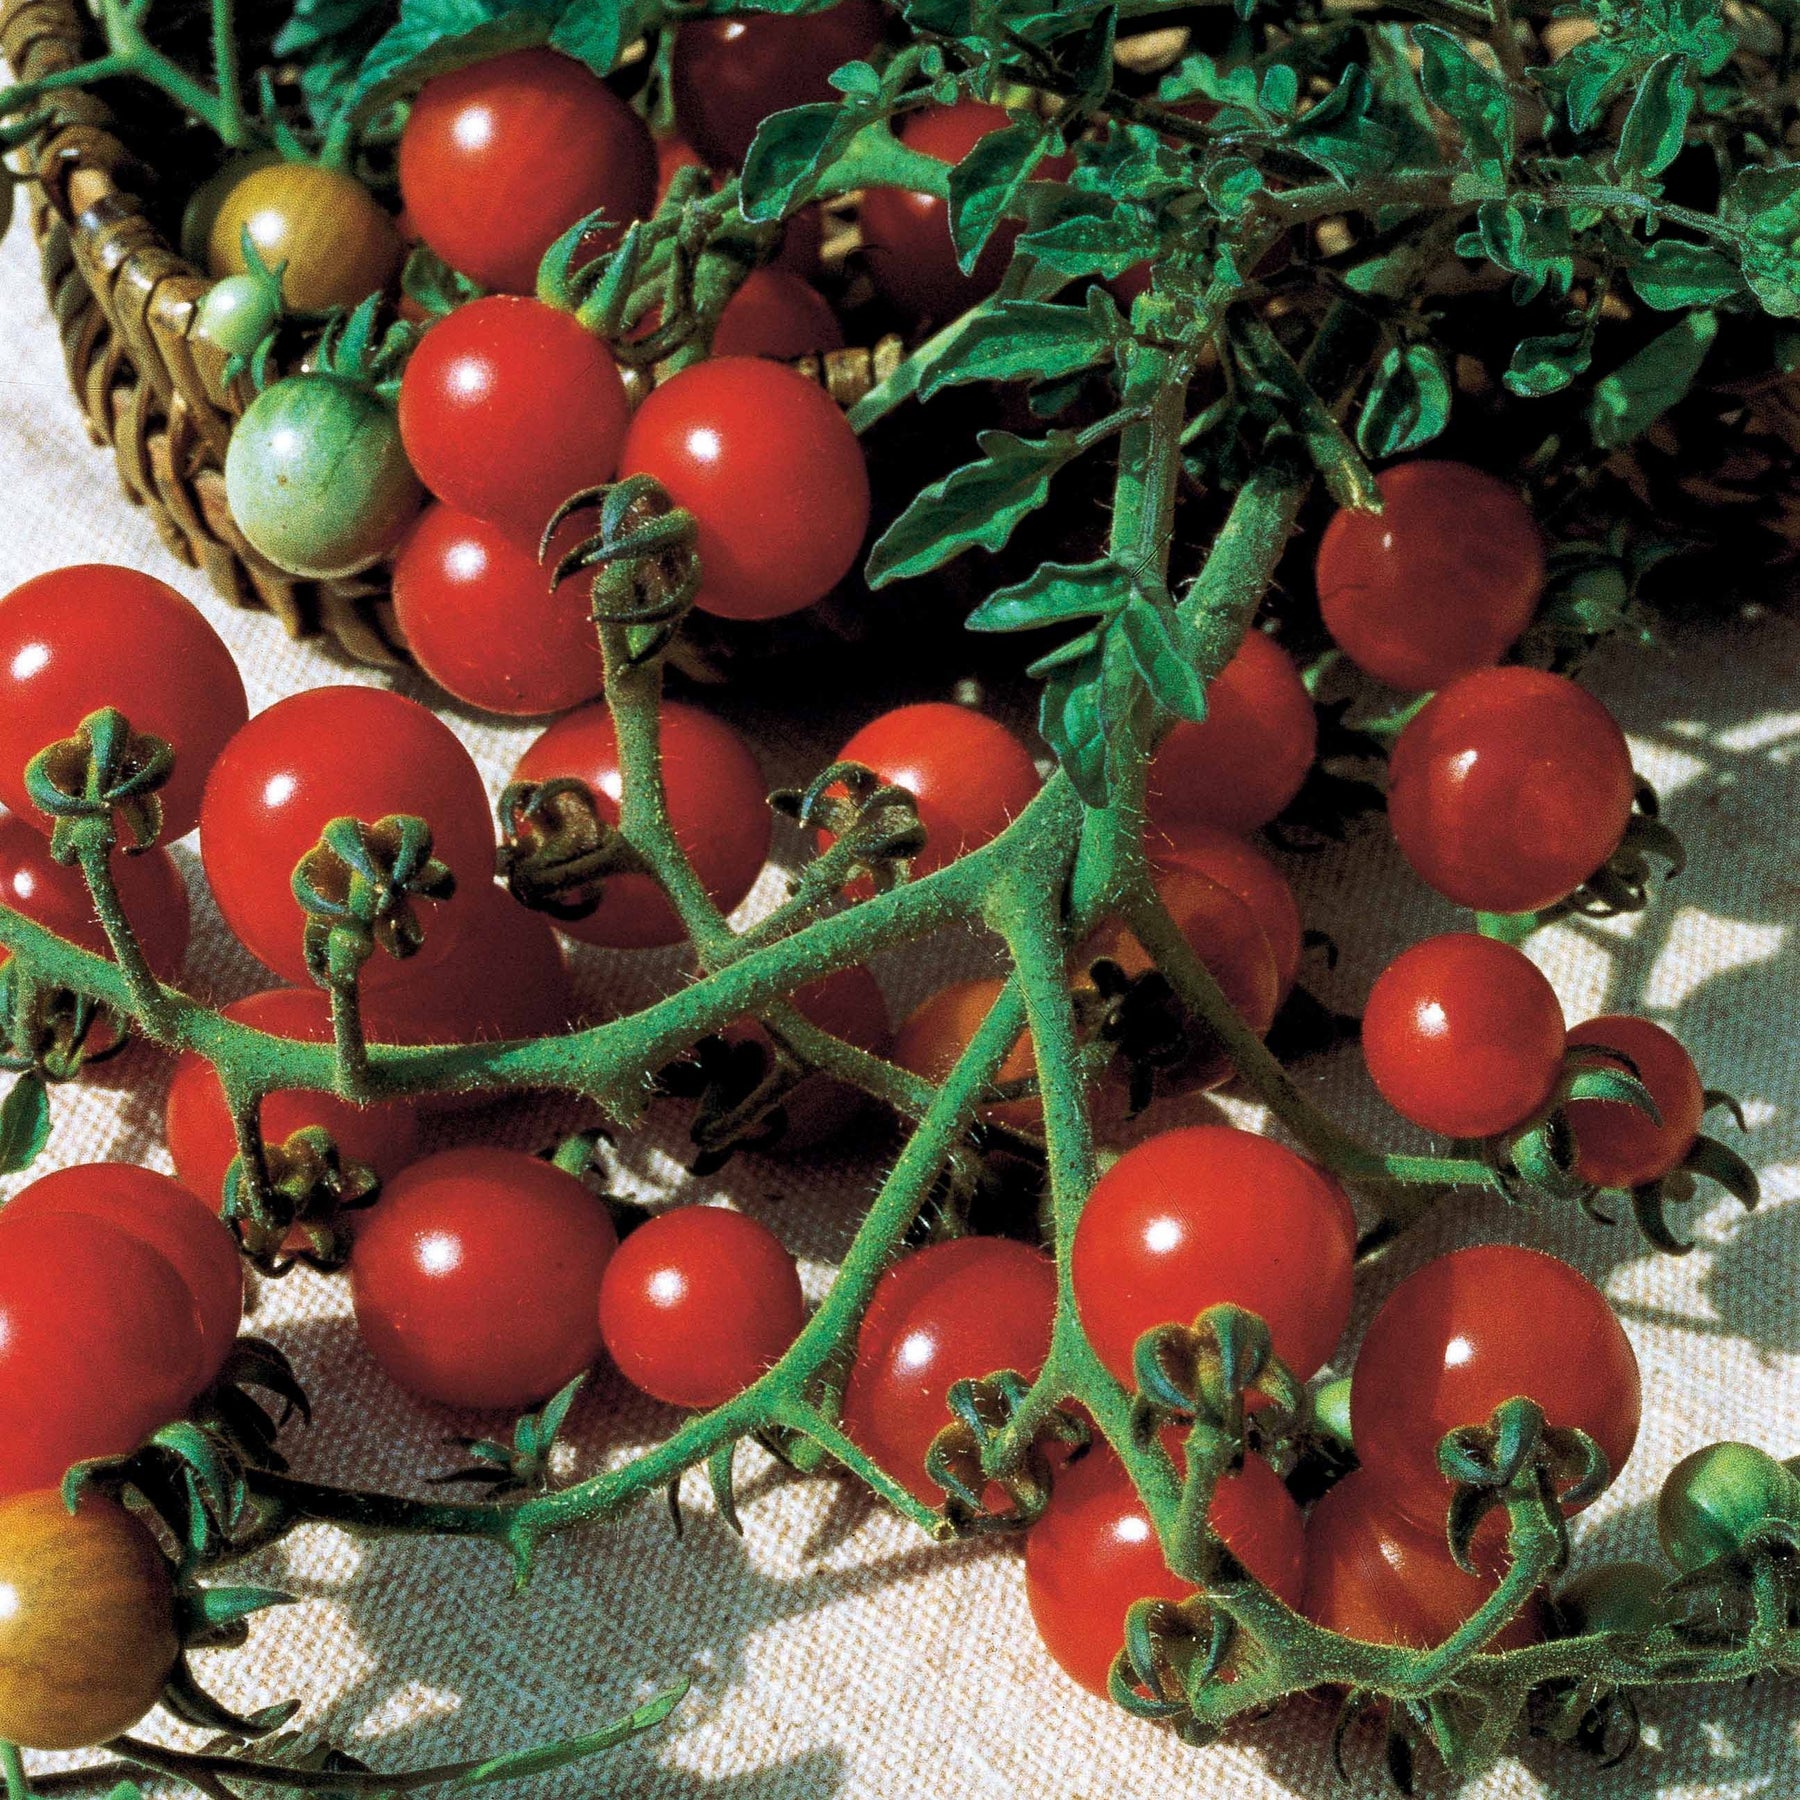 Tomate Rosso Cremlin F1 (type Sweet 100).